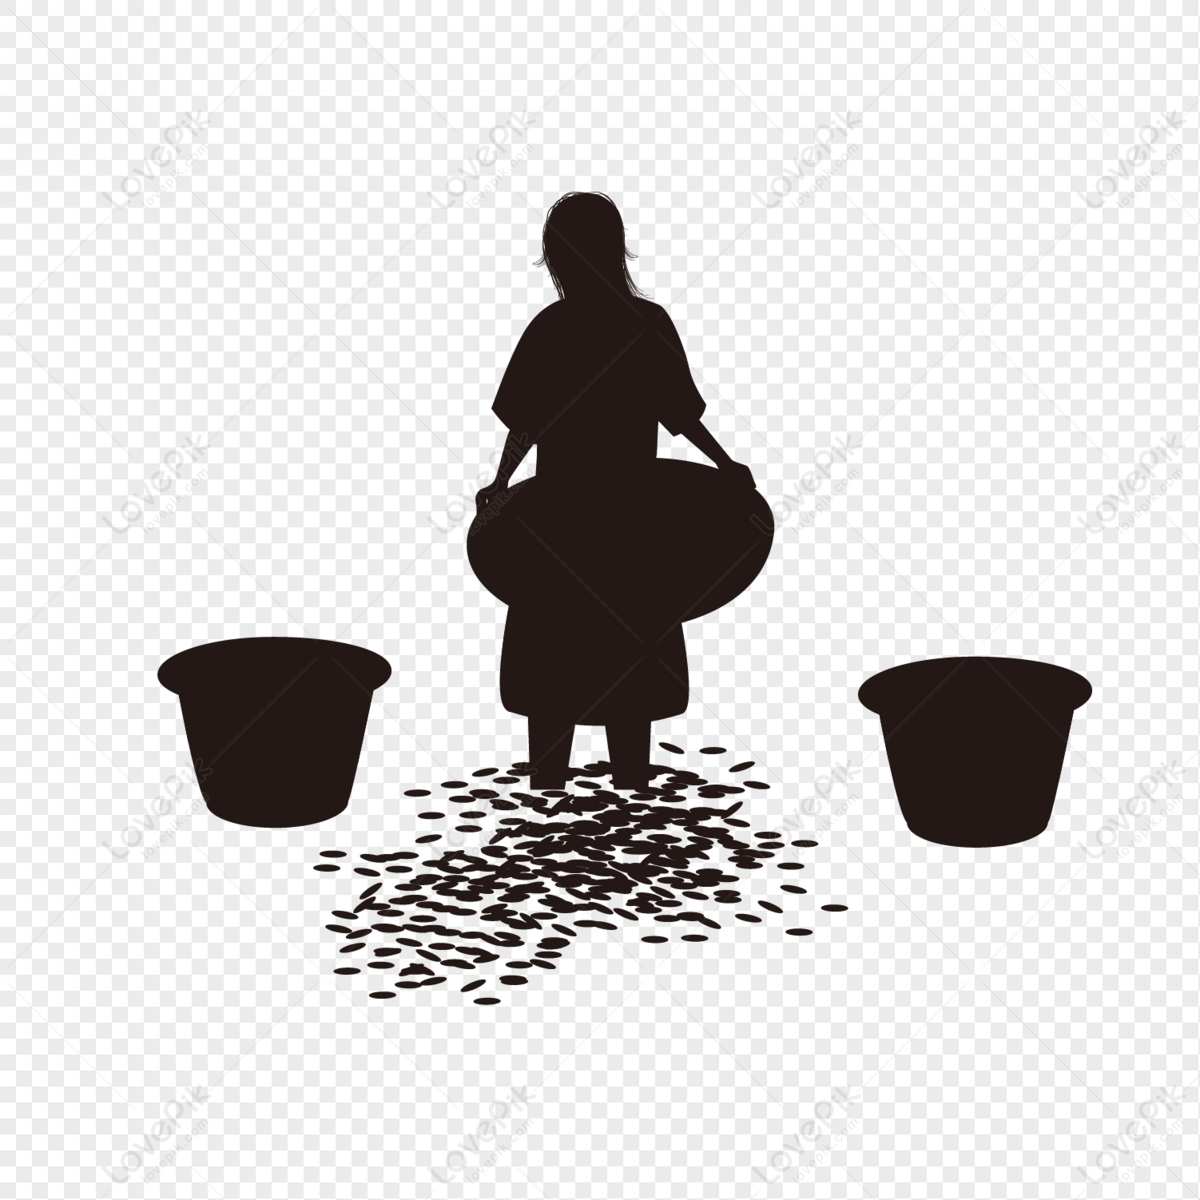 Farmer Fishing Silhouette Elements, Silhouette Woman, Fish Silhouette,  Farmers PNG Free Download And Clipart Image For Free Download - Lovepik